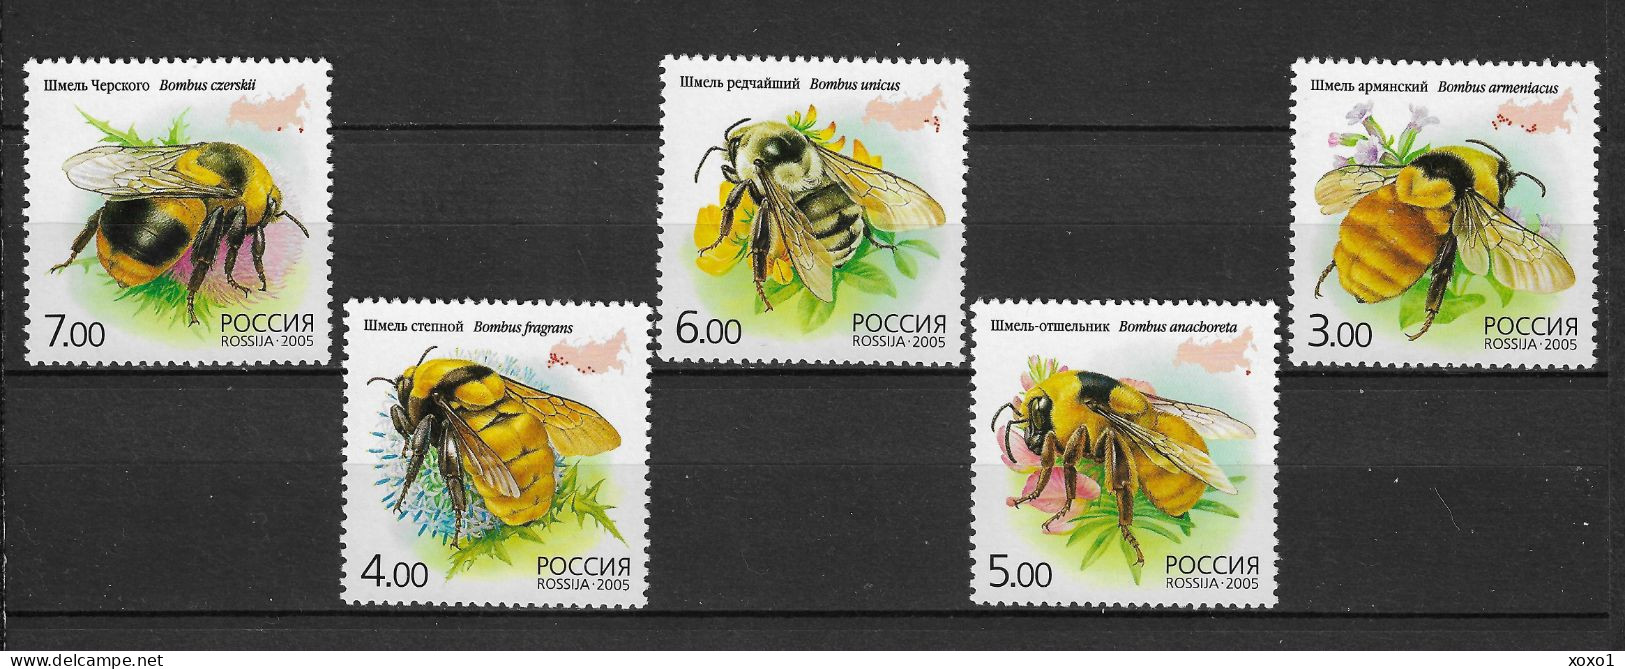 Russia 2005 MiNr. 1266 - 1270 Russland Insects Bumblebees 5v MNH** 3,40 € - Abejas